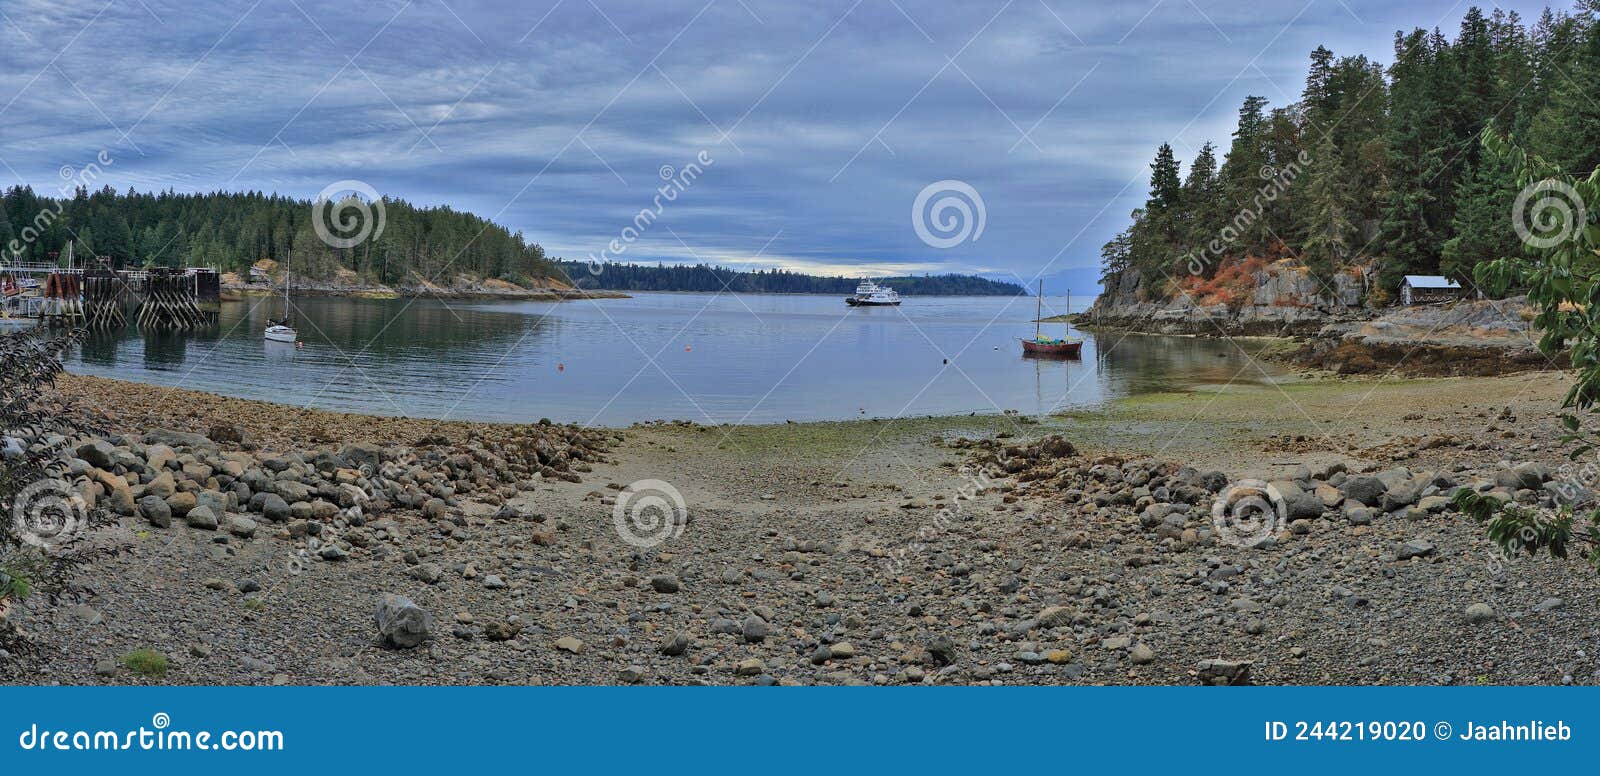 bc ferry entering whaletown on cortes island, discovery islands, british columbia, canada